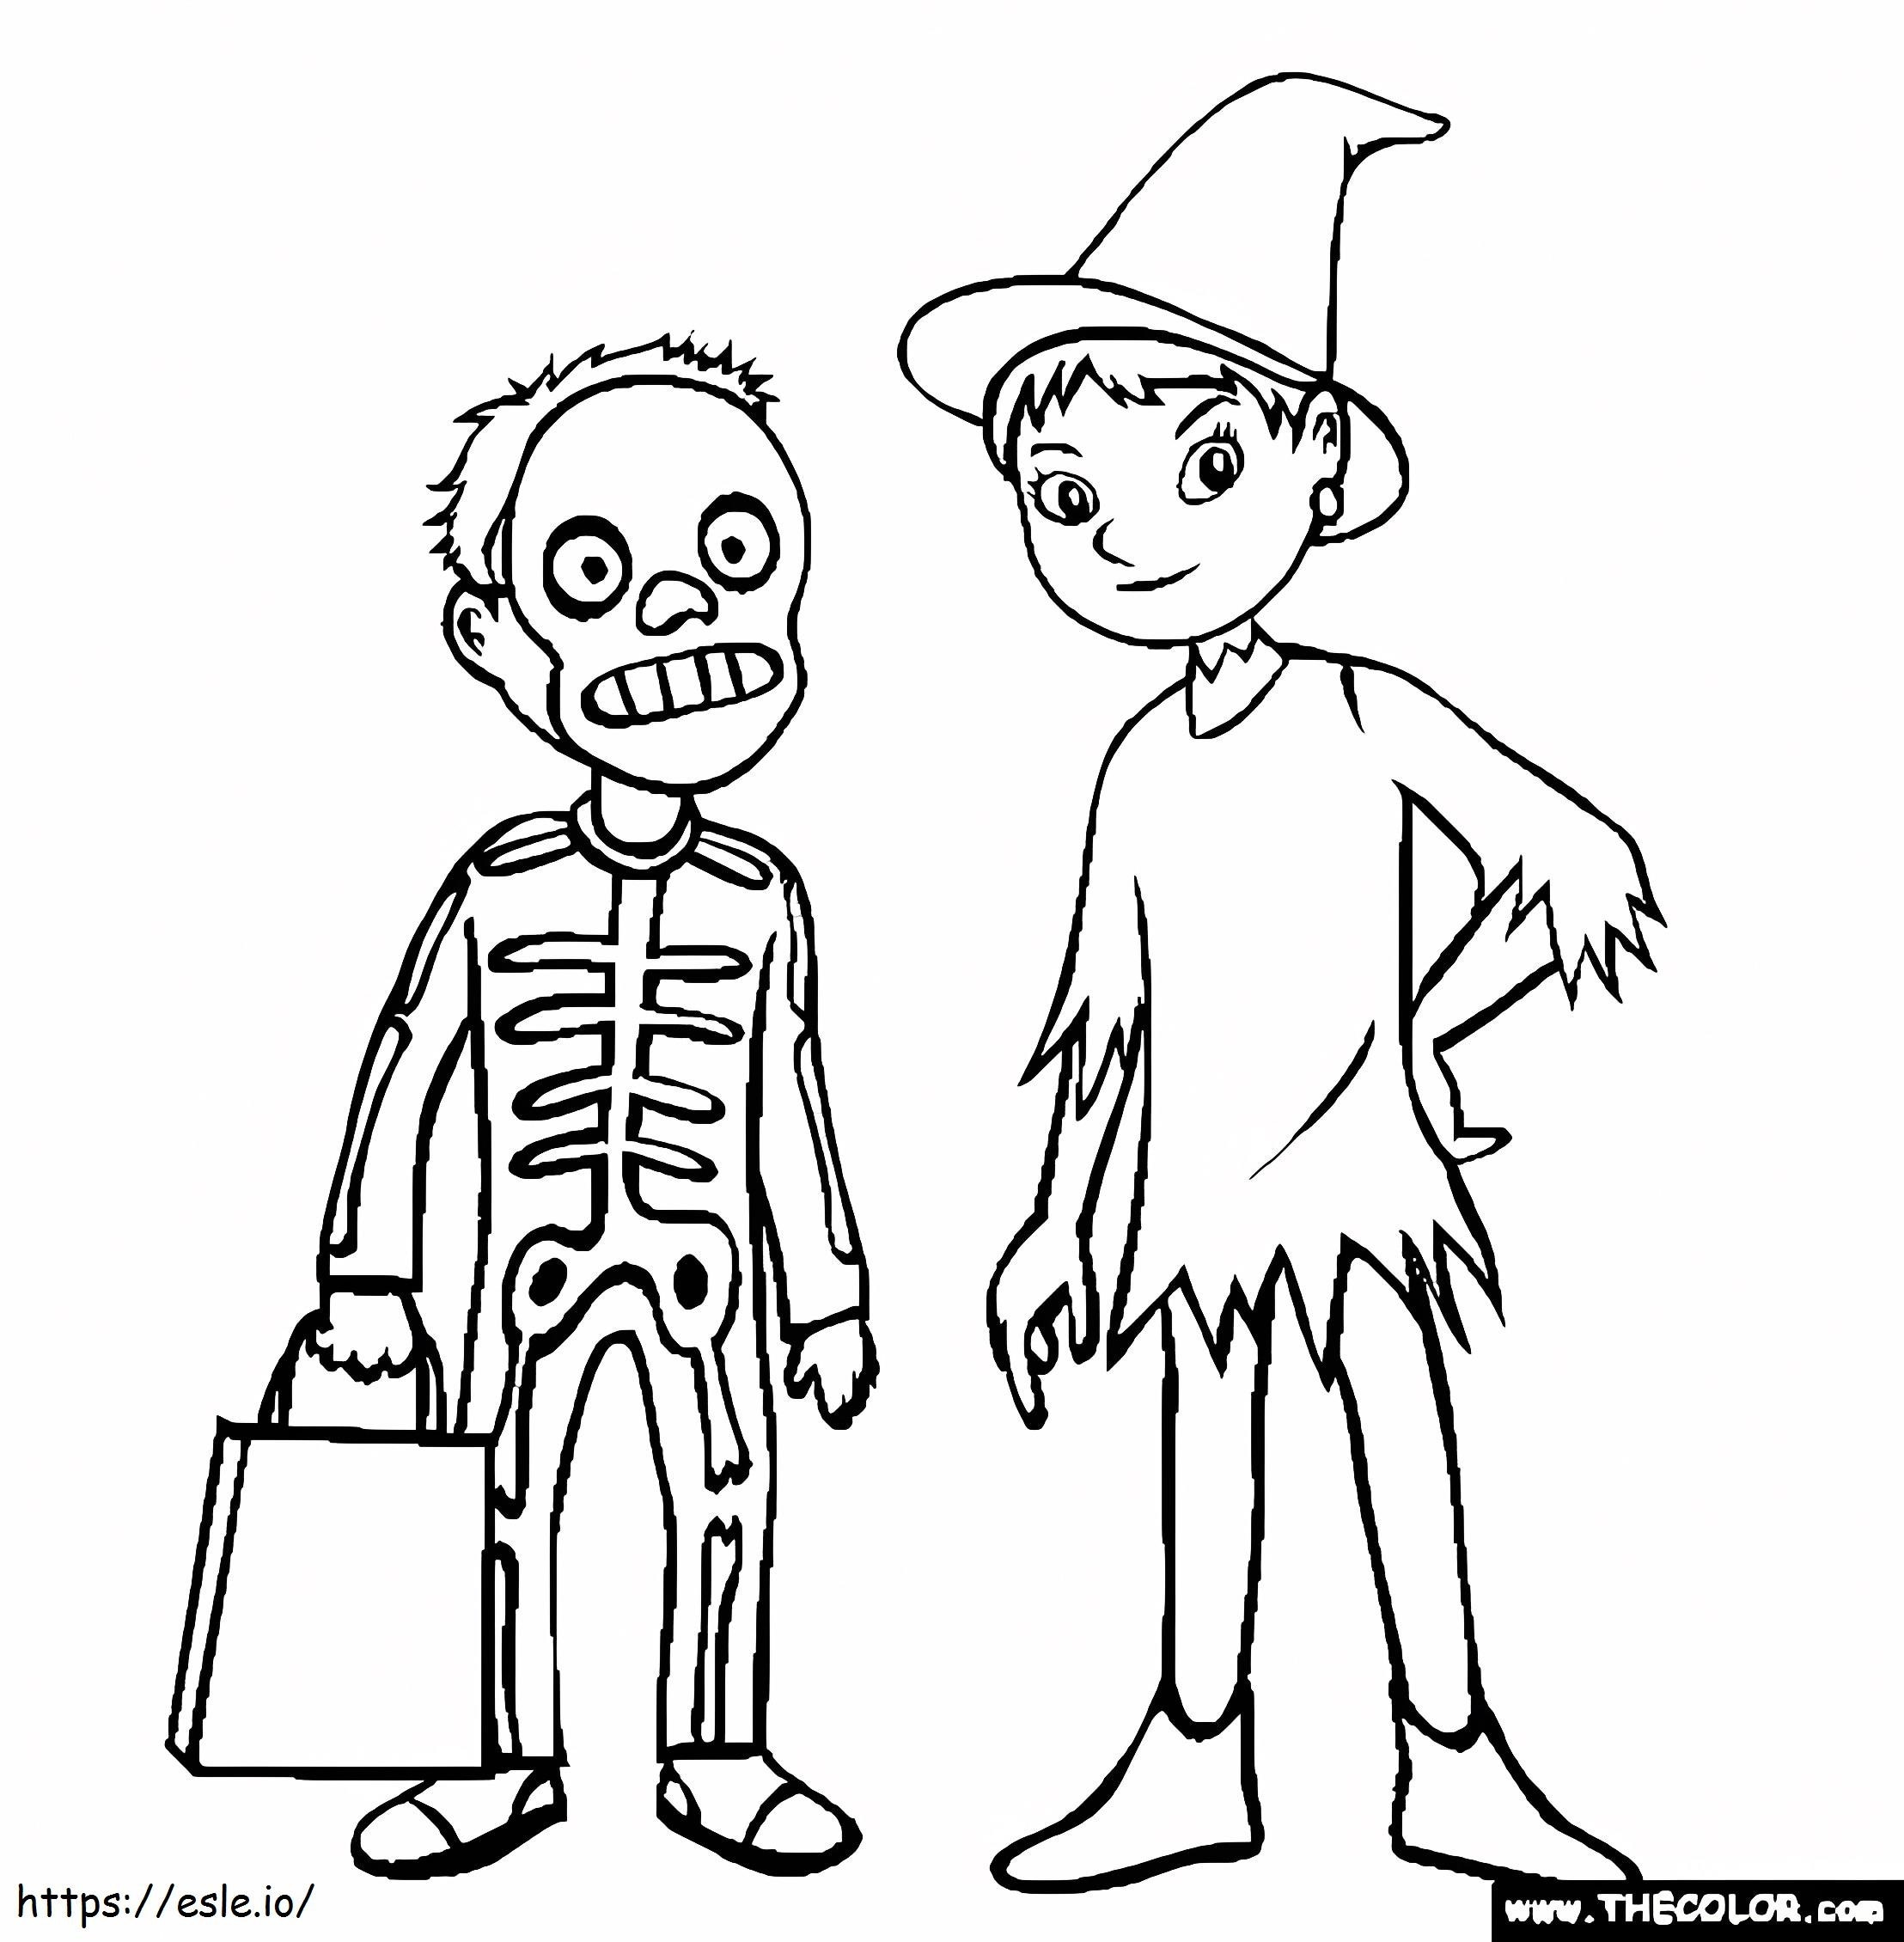 1539691607 Costumes coloring page